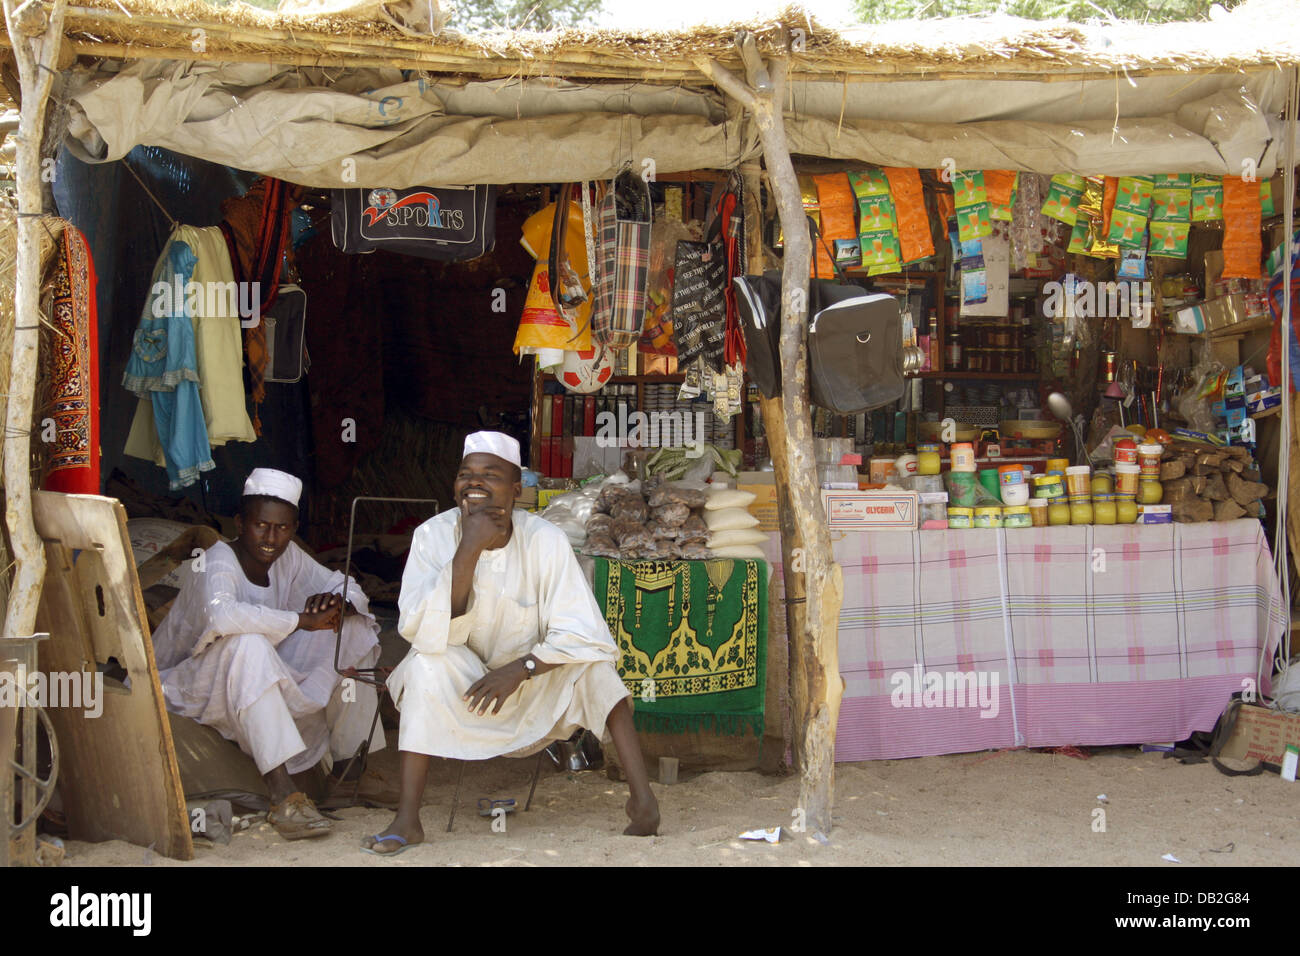 Two man sit outside a market booth in Bindisi in Western Darfur, Sudan, 10 December 2007. The number of 17,000 internal refugees living in Bindisi is equivalent to two-thirds of the local population. Photo: Peter Steffen Stock Photo